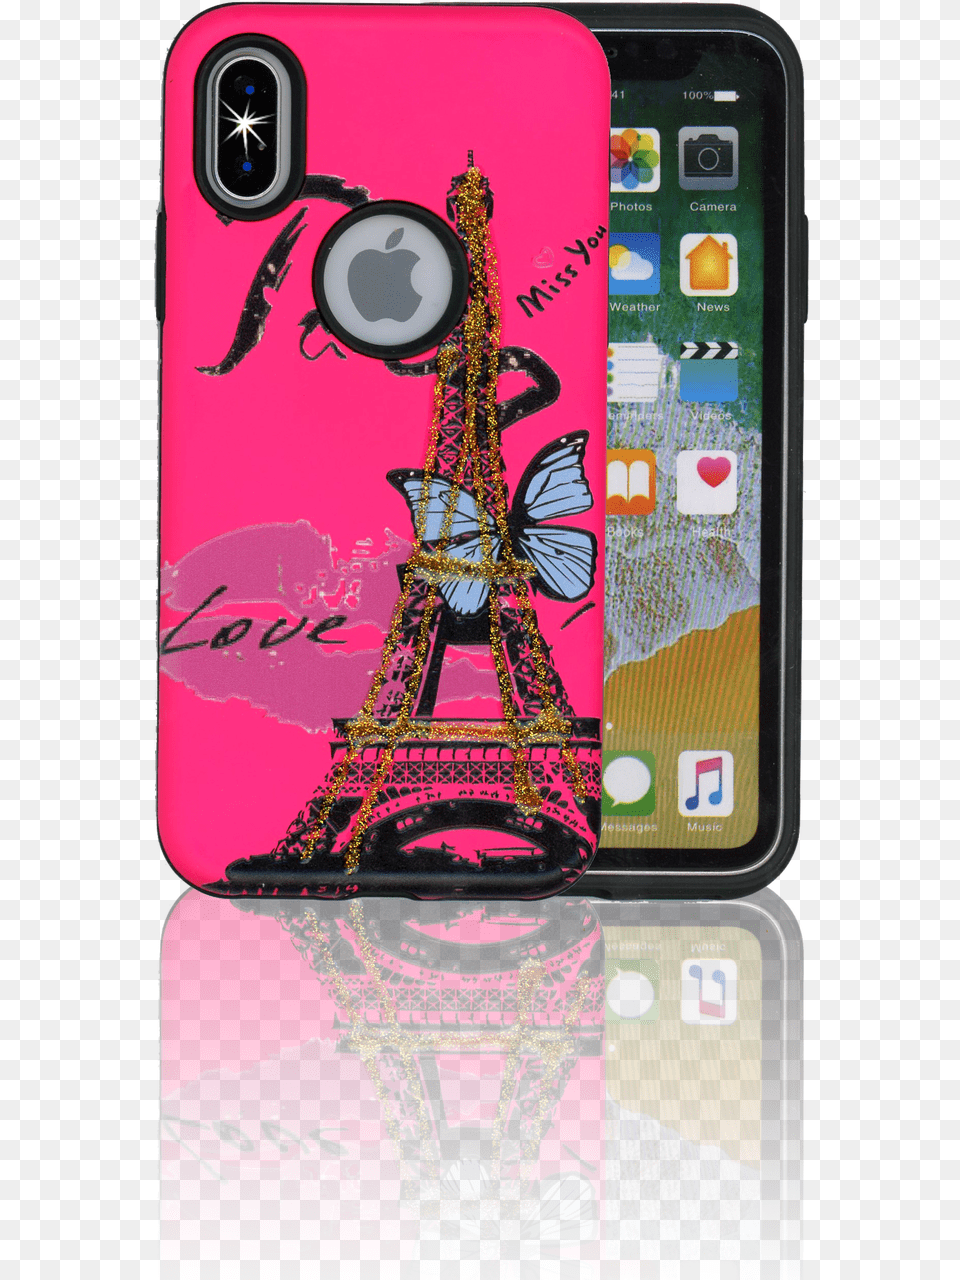 Iphone X Mm 3d Paris Butterfly Mobile Phone, Electronics, Mobile Phone Png